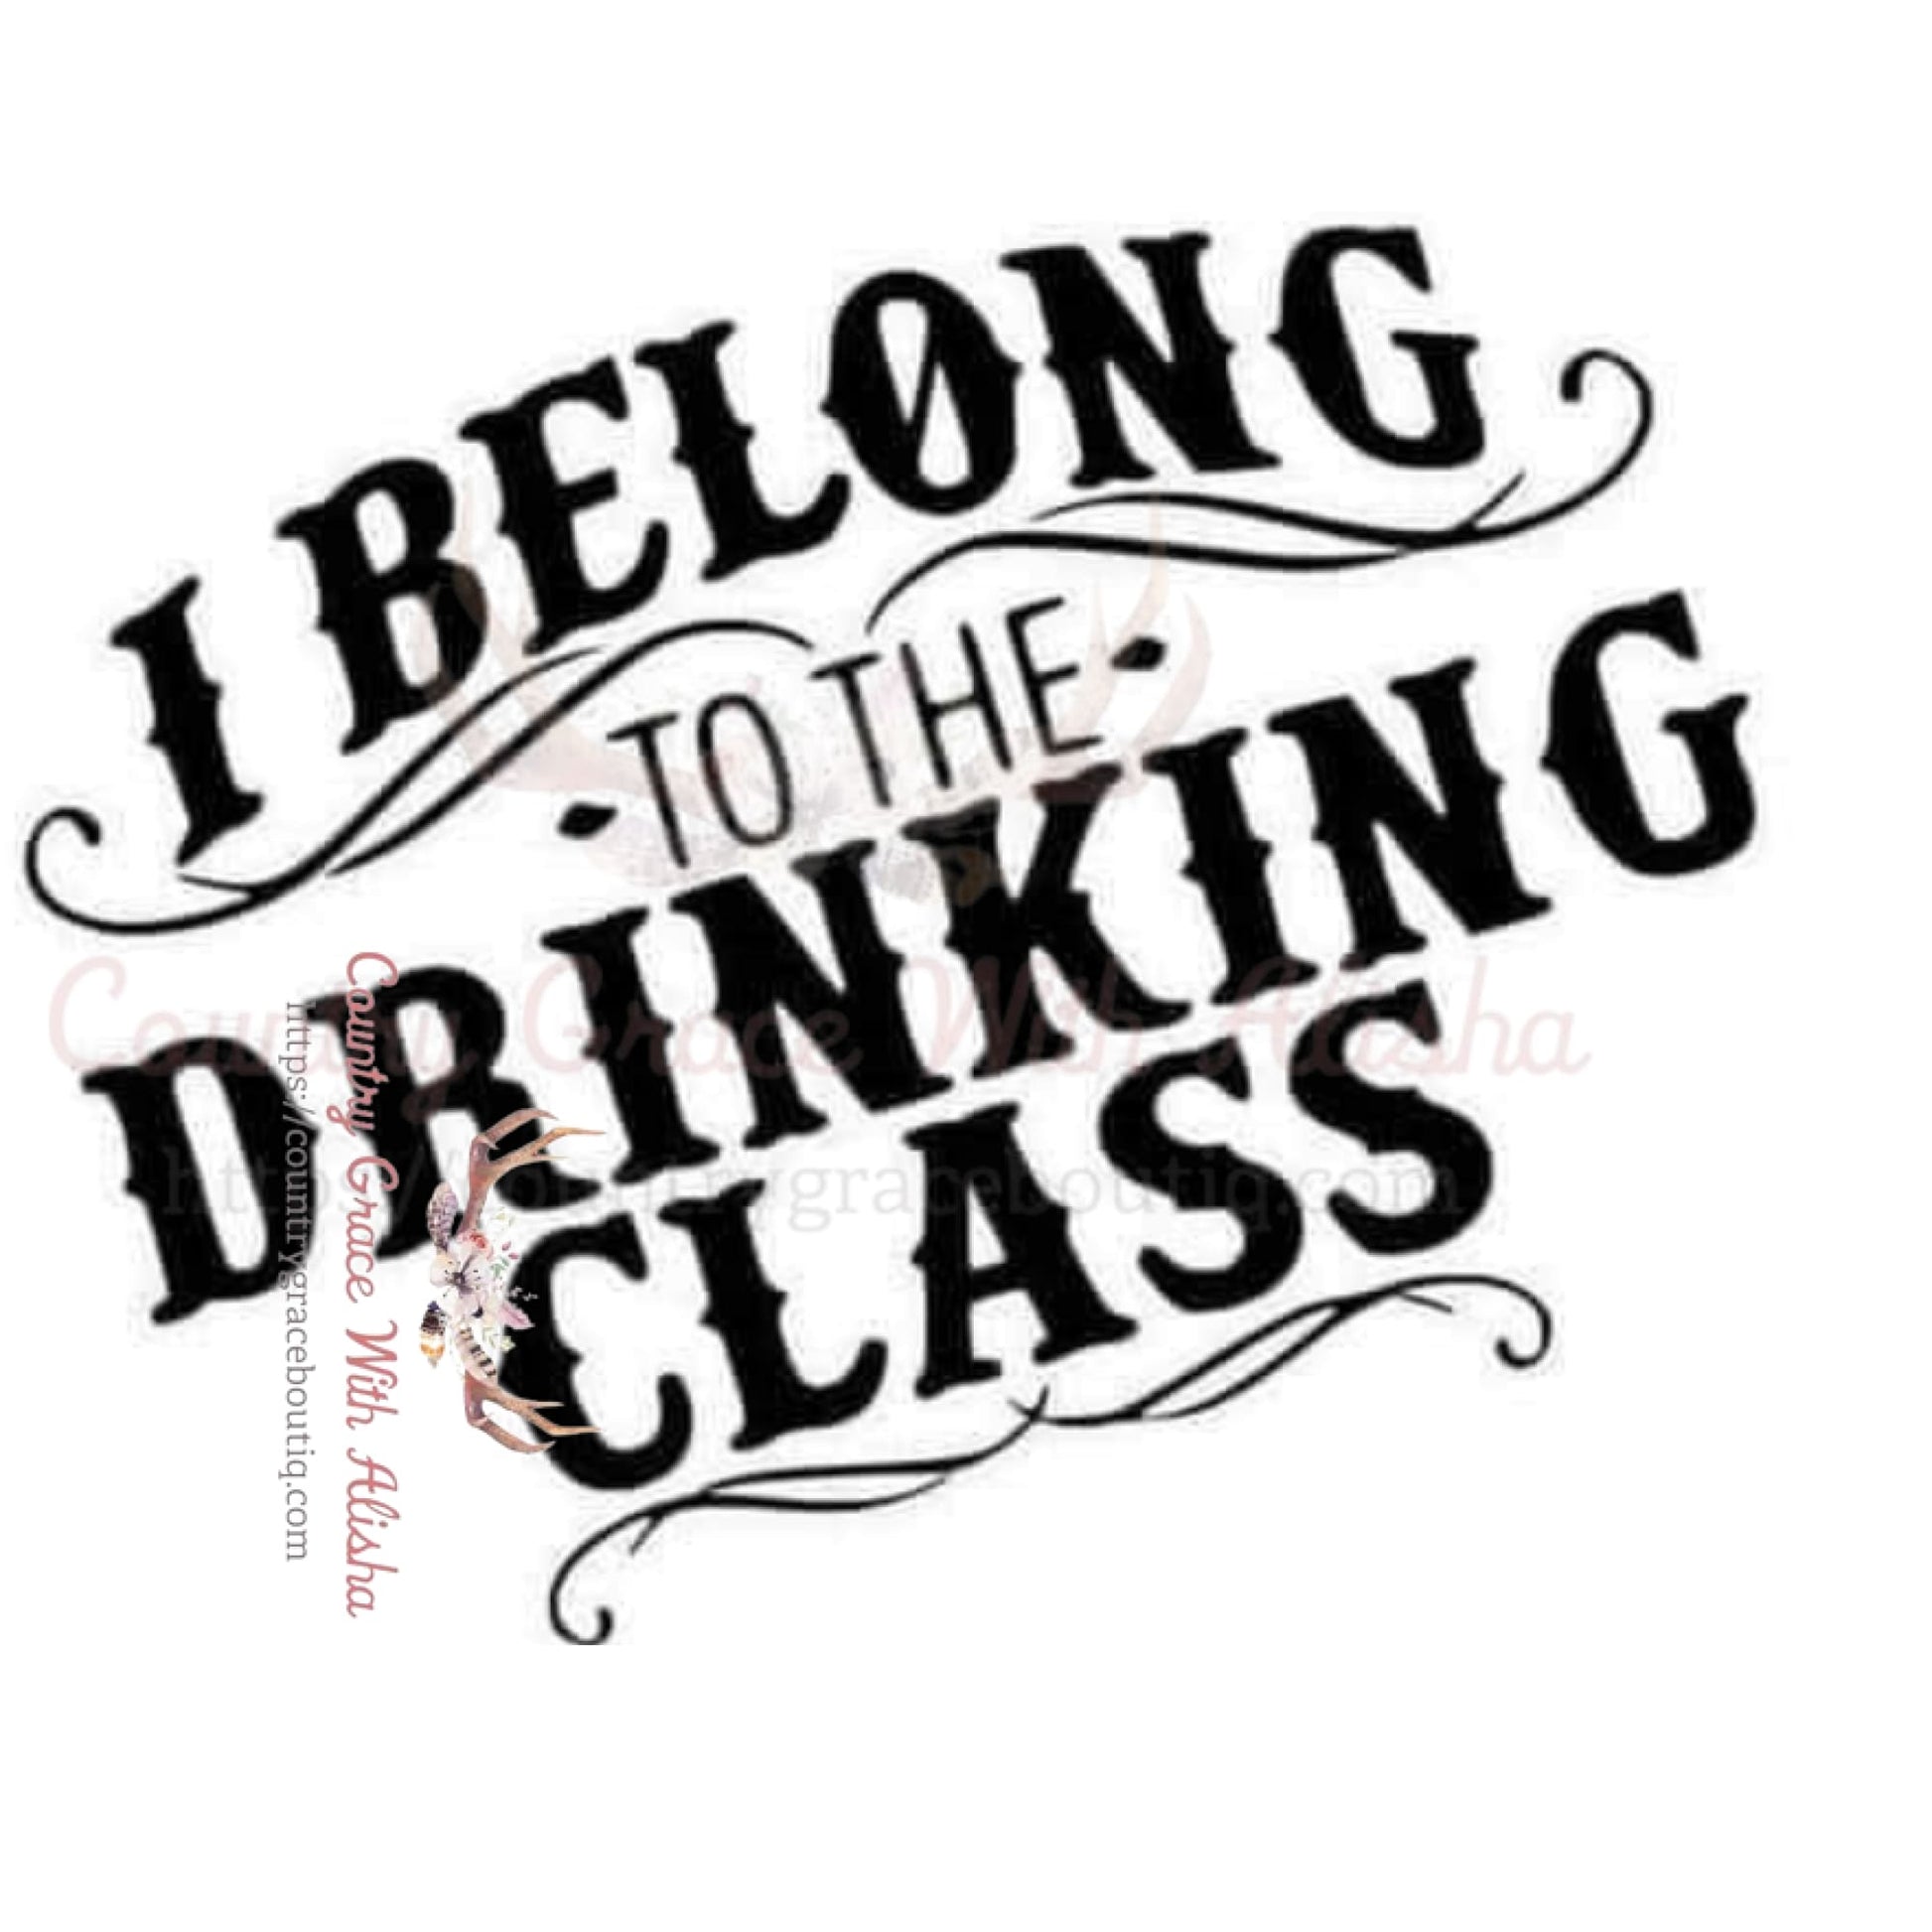 I Belong To The Drinking Class Sublimation Transfer - Sub 